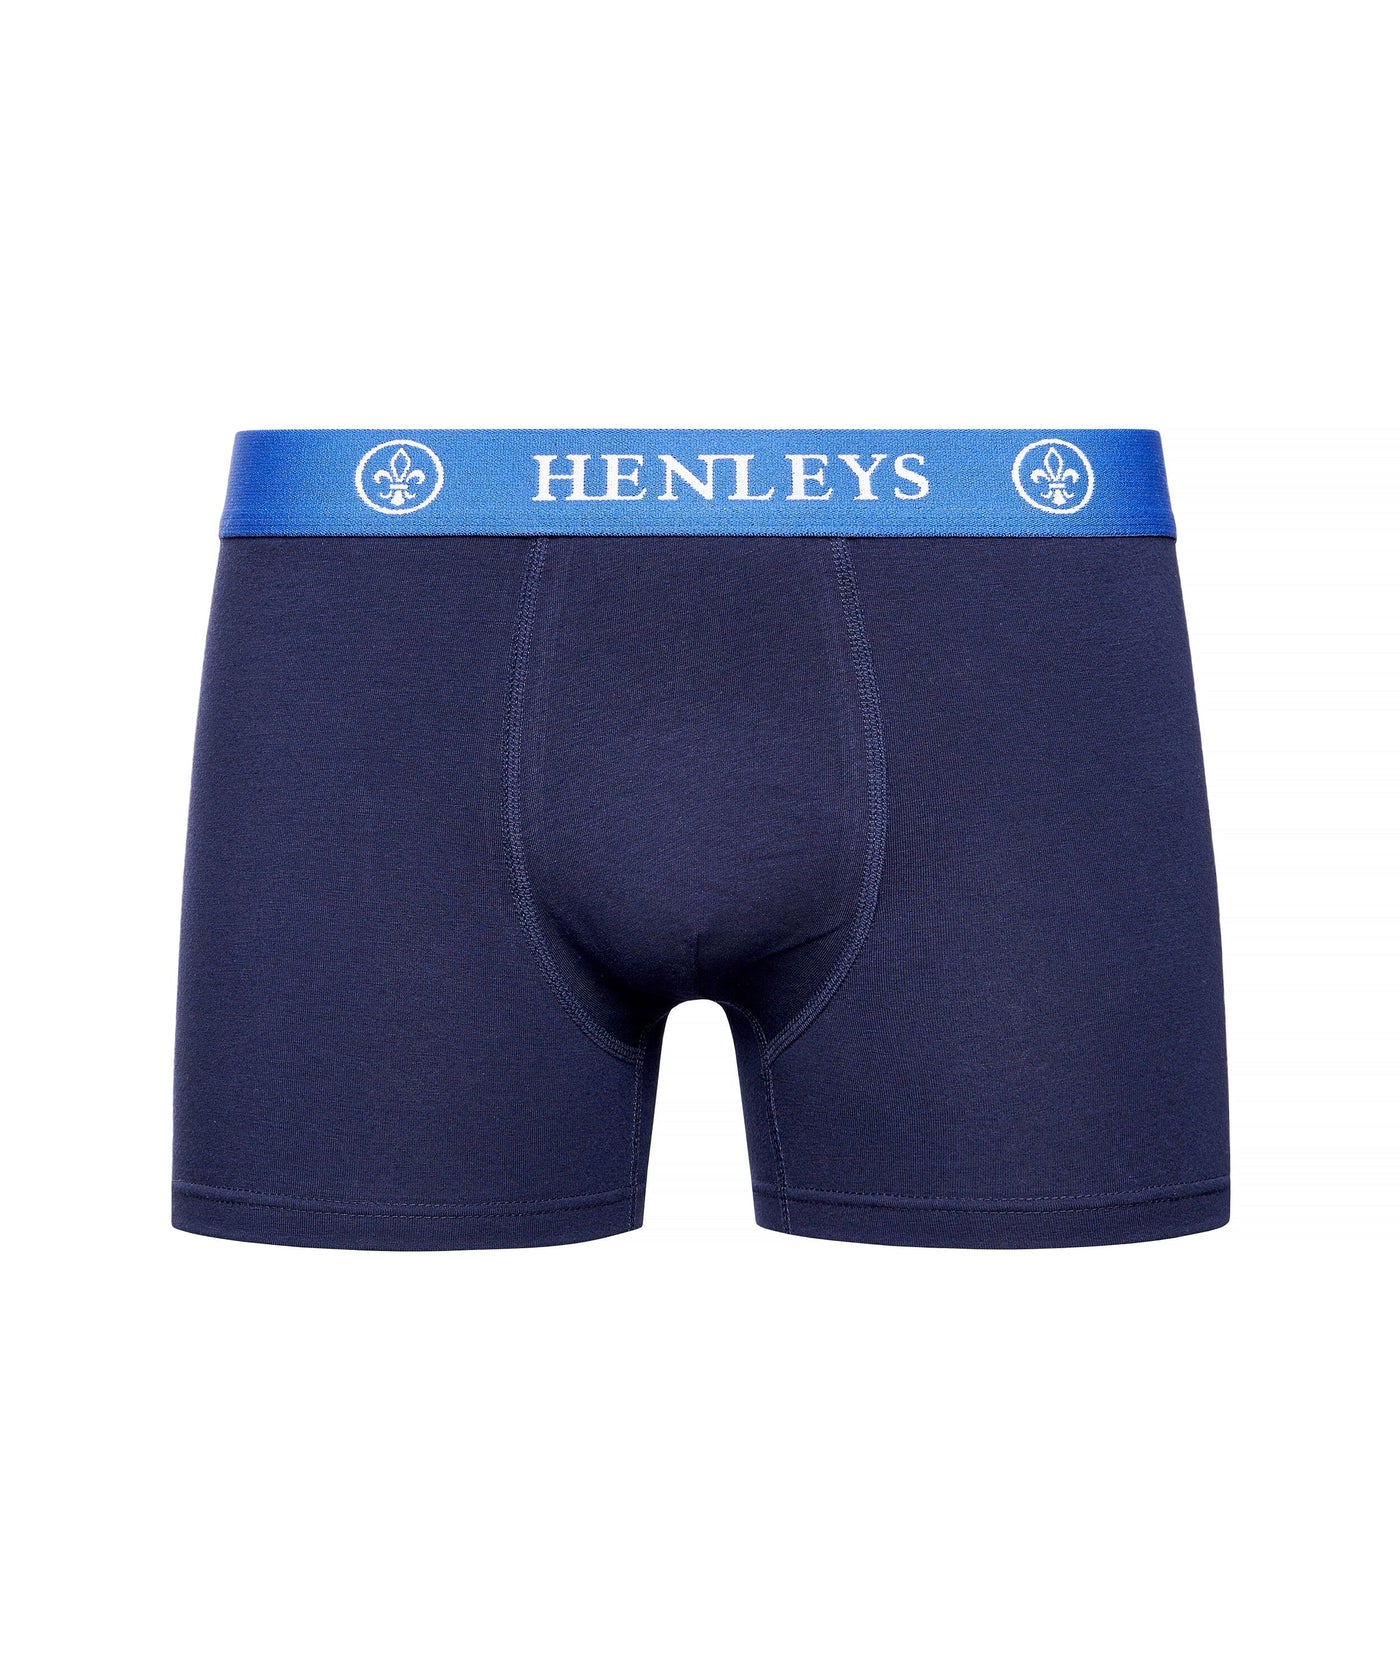 Rutlers Boxers 3pk Assorted